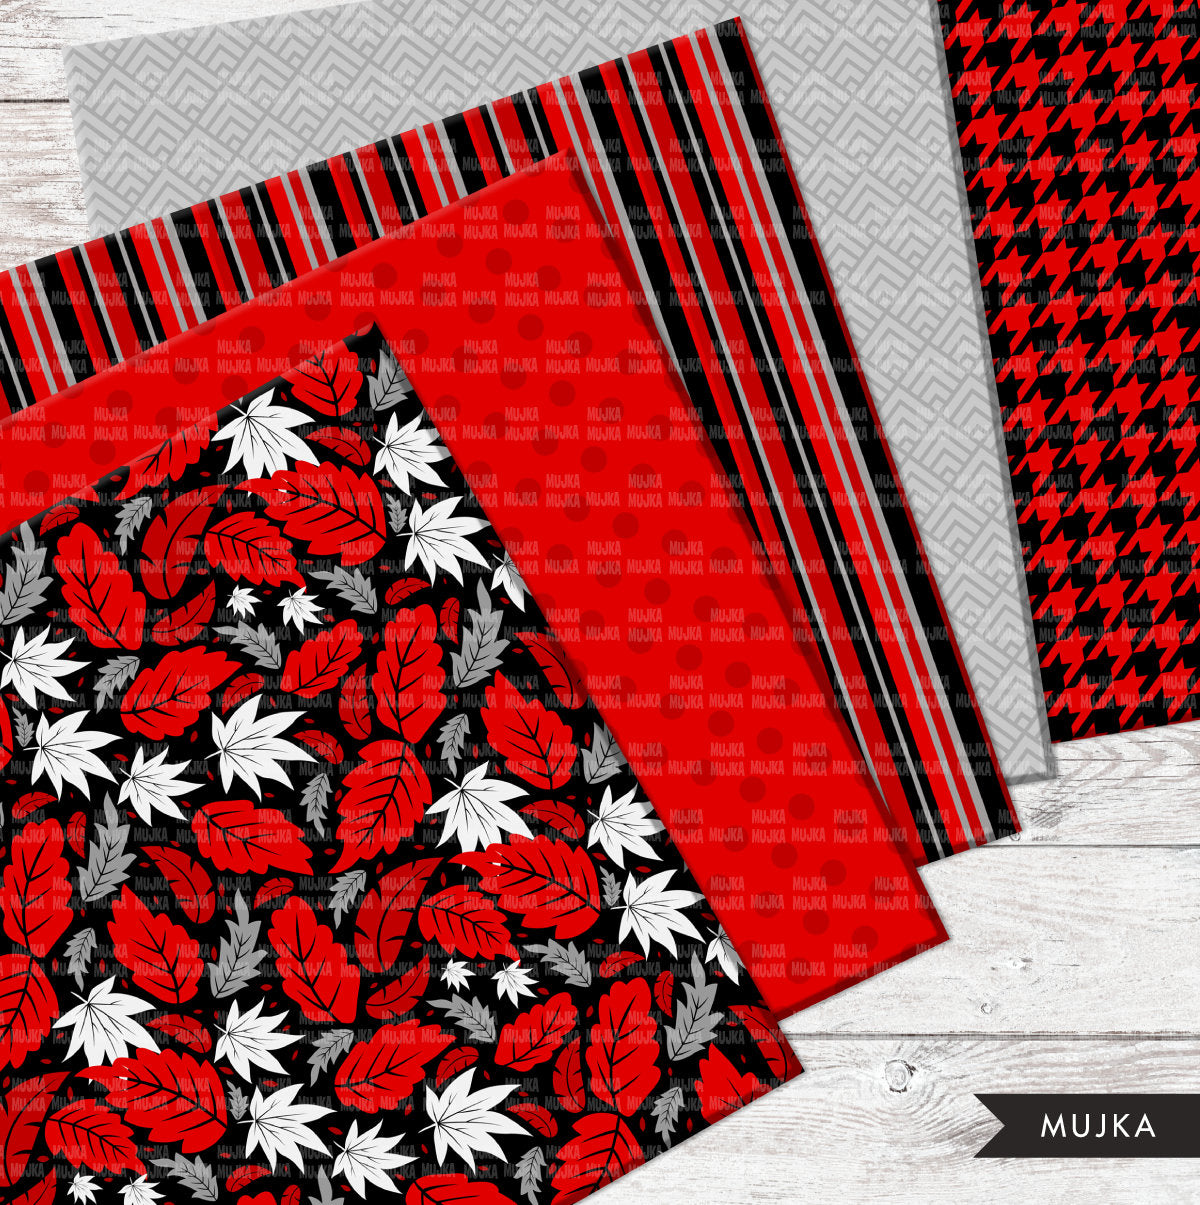 Red & Black Sorority digital papers, red seamless patterns, sublimation designs, digital papers, floral papers, geometric patterns